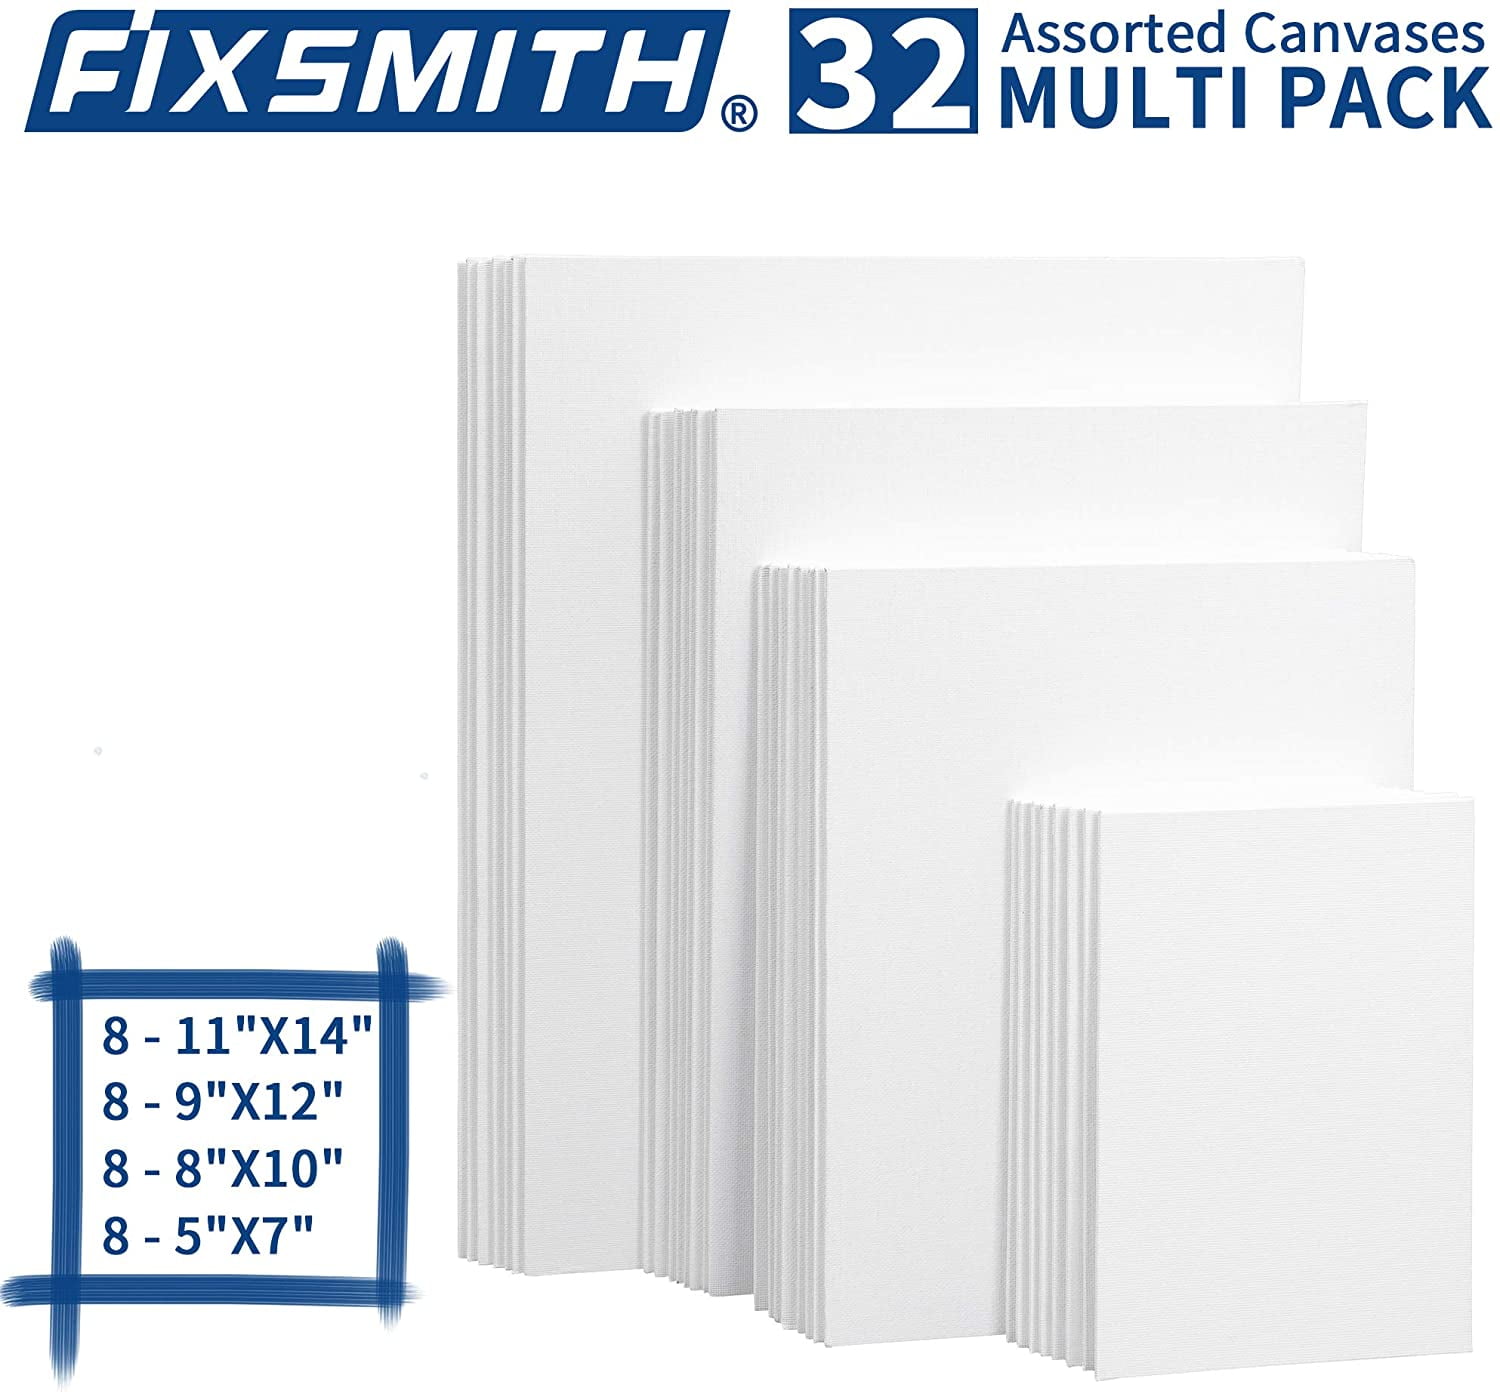 FIXSMITH Painting Canvas Panels - 10x10 Inch Canvas Board Super Value 12  Pack,100% Cotton,Square Canvas Panel,Acid Free,Artist Canvas Boards for